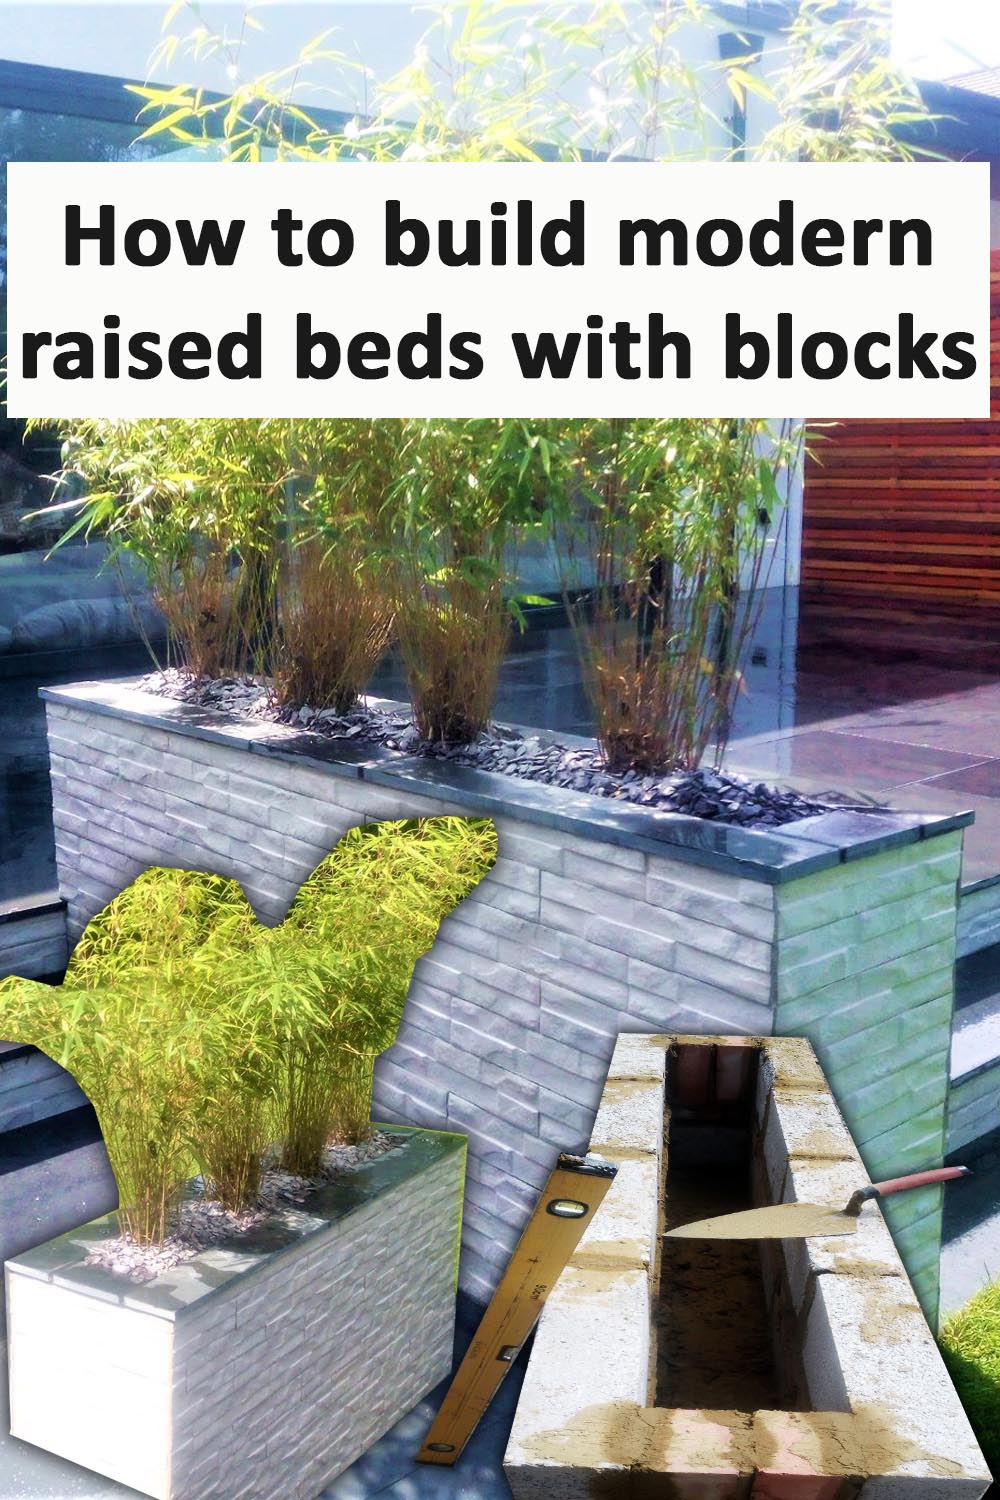 How to build raised beds with concrete blocks